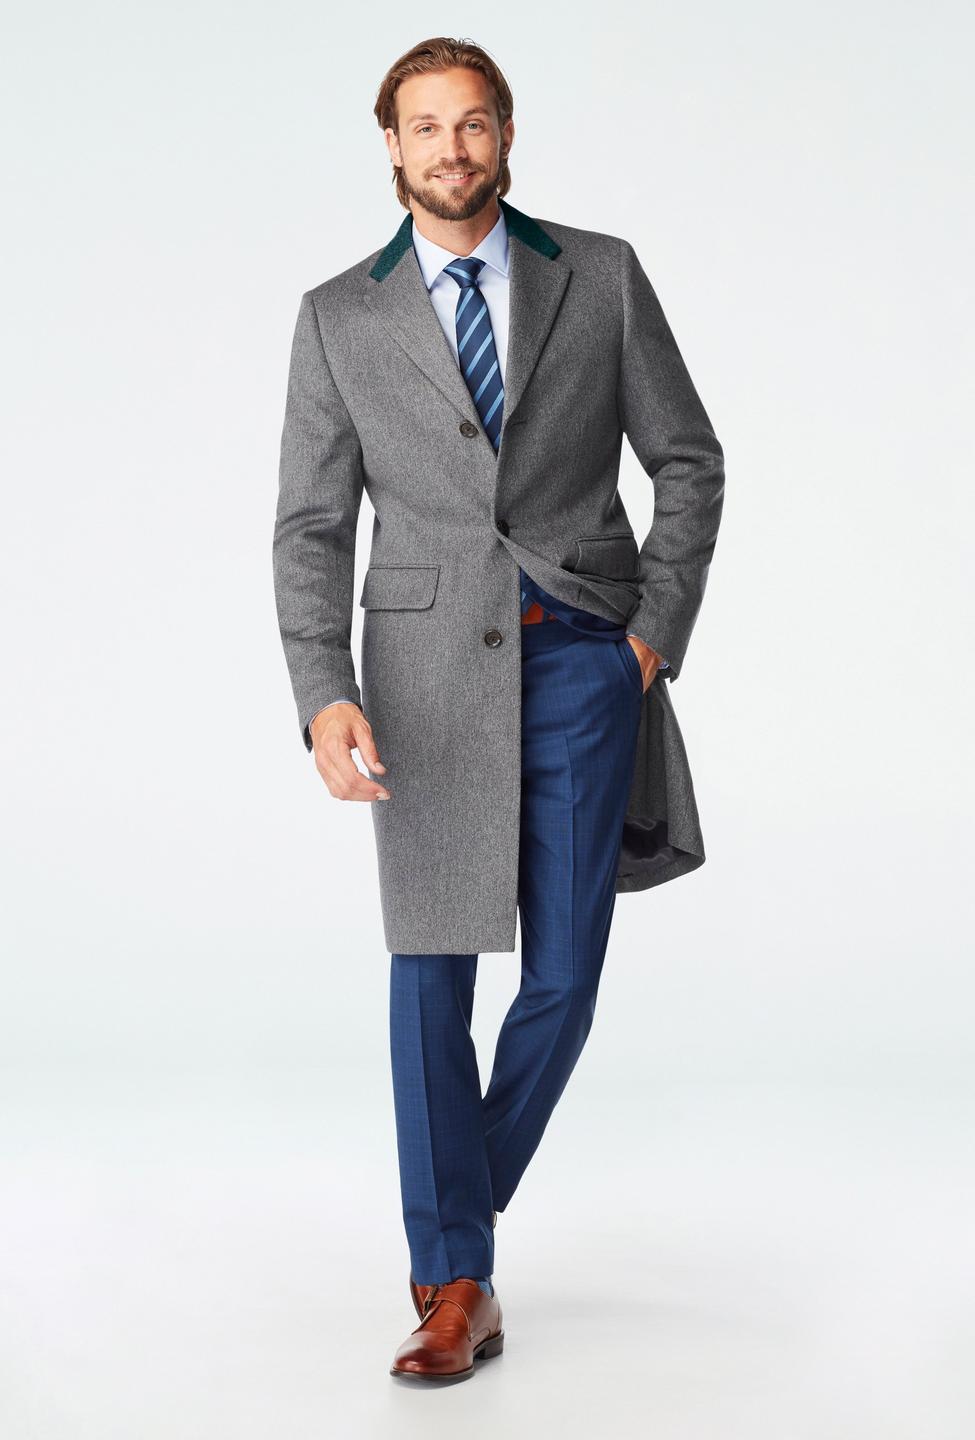 Gray outerwear - Huntley Solid Design from Indochino Collection